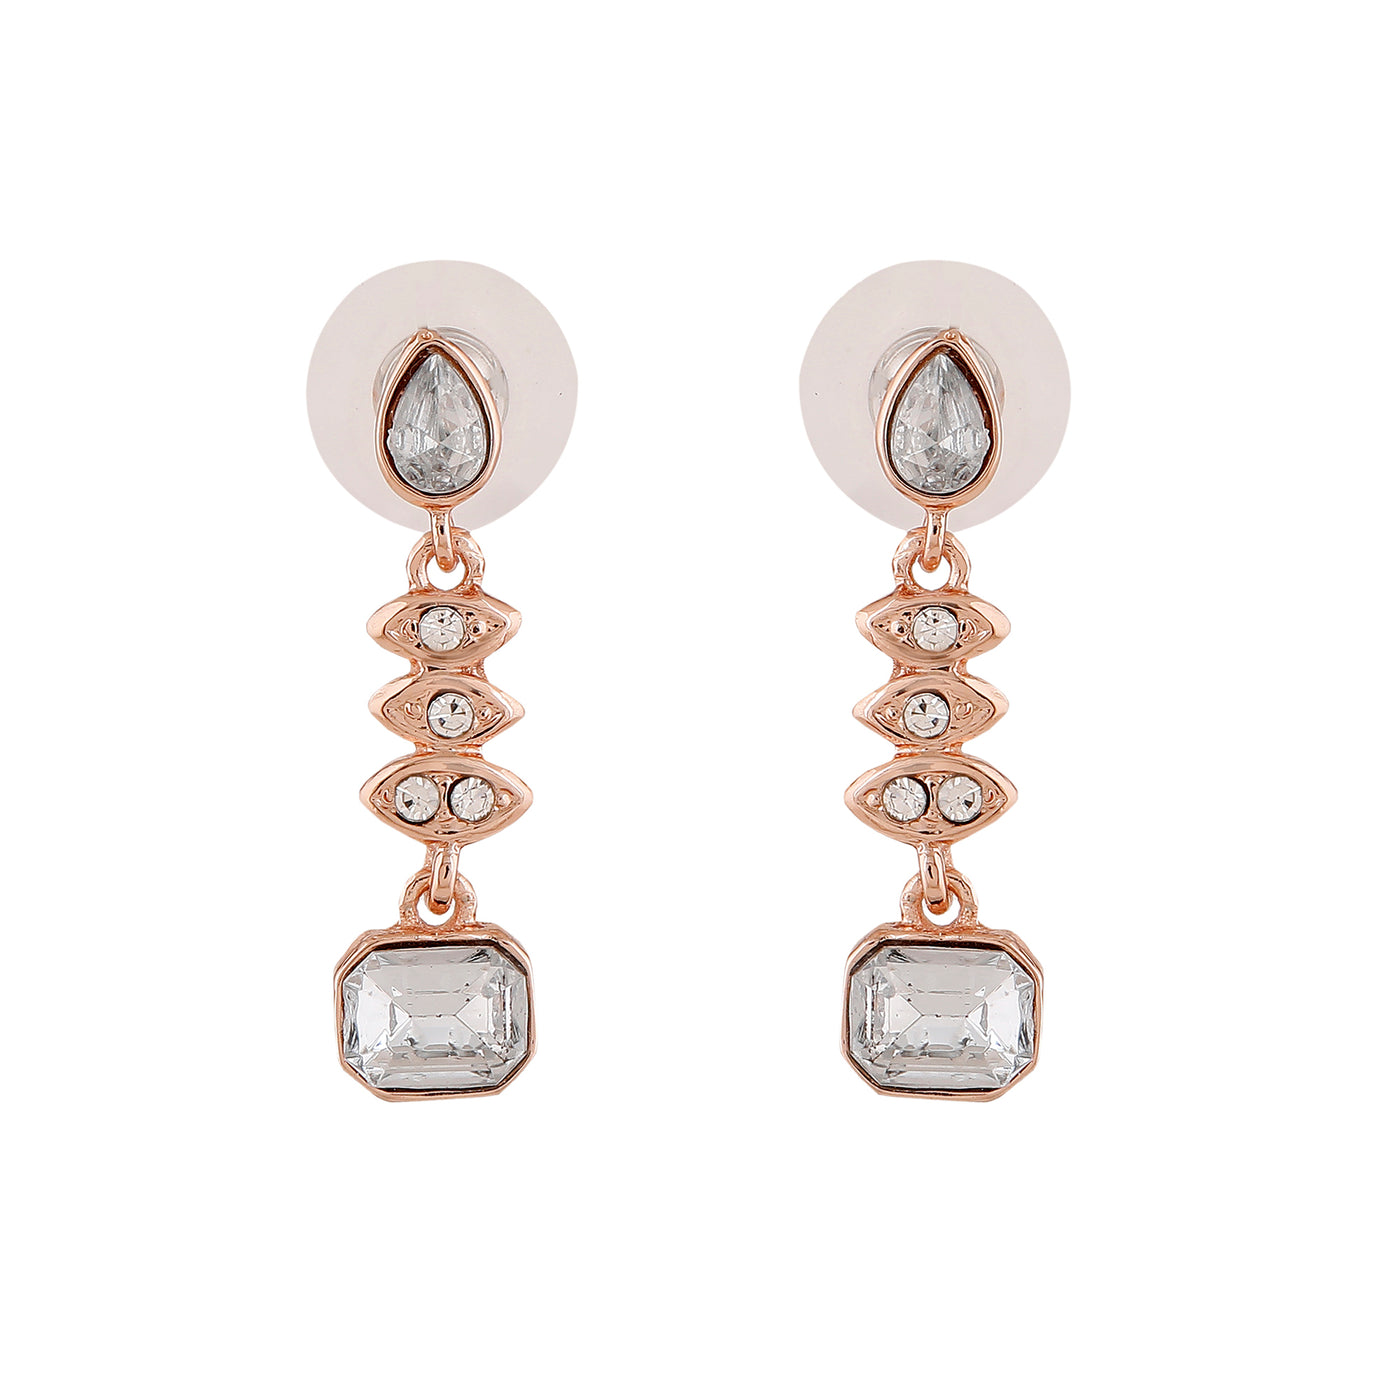 Estele Rose Gold Plated Elegant Drop Earrings with Crystals for Women